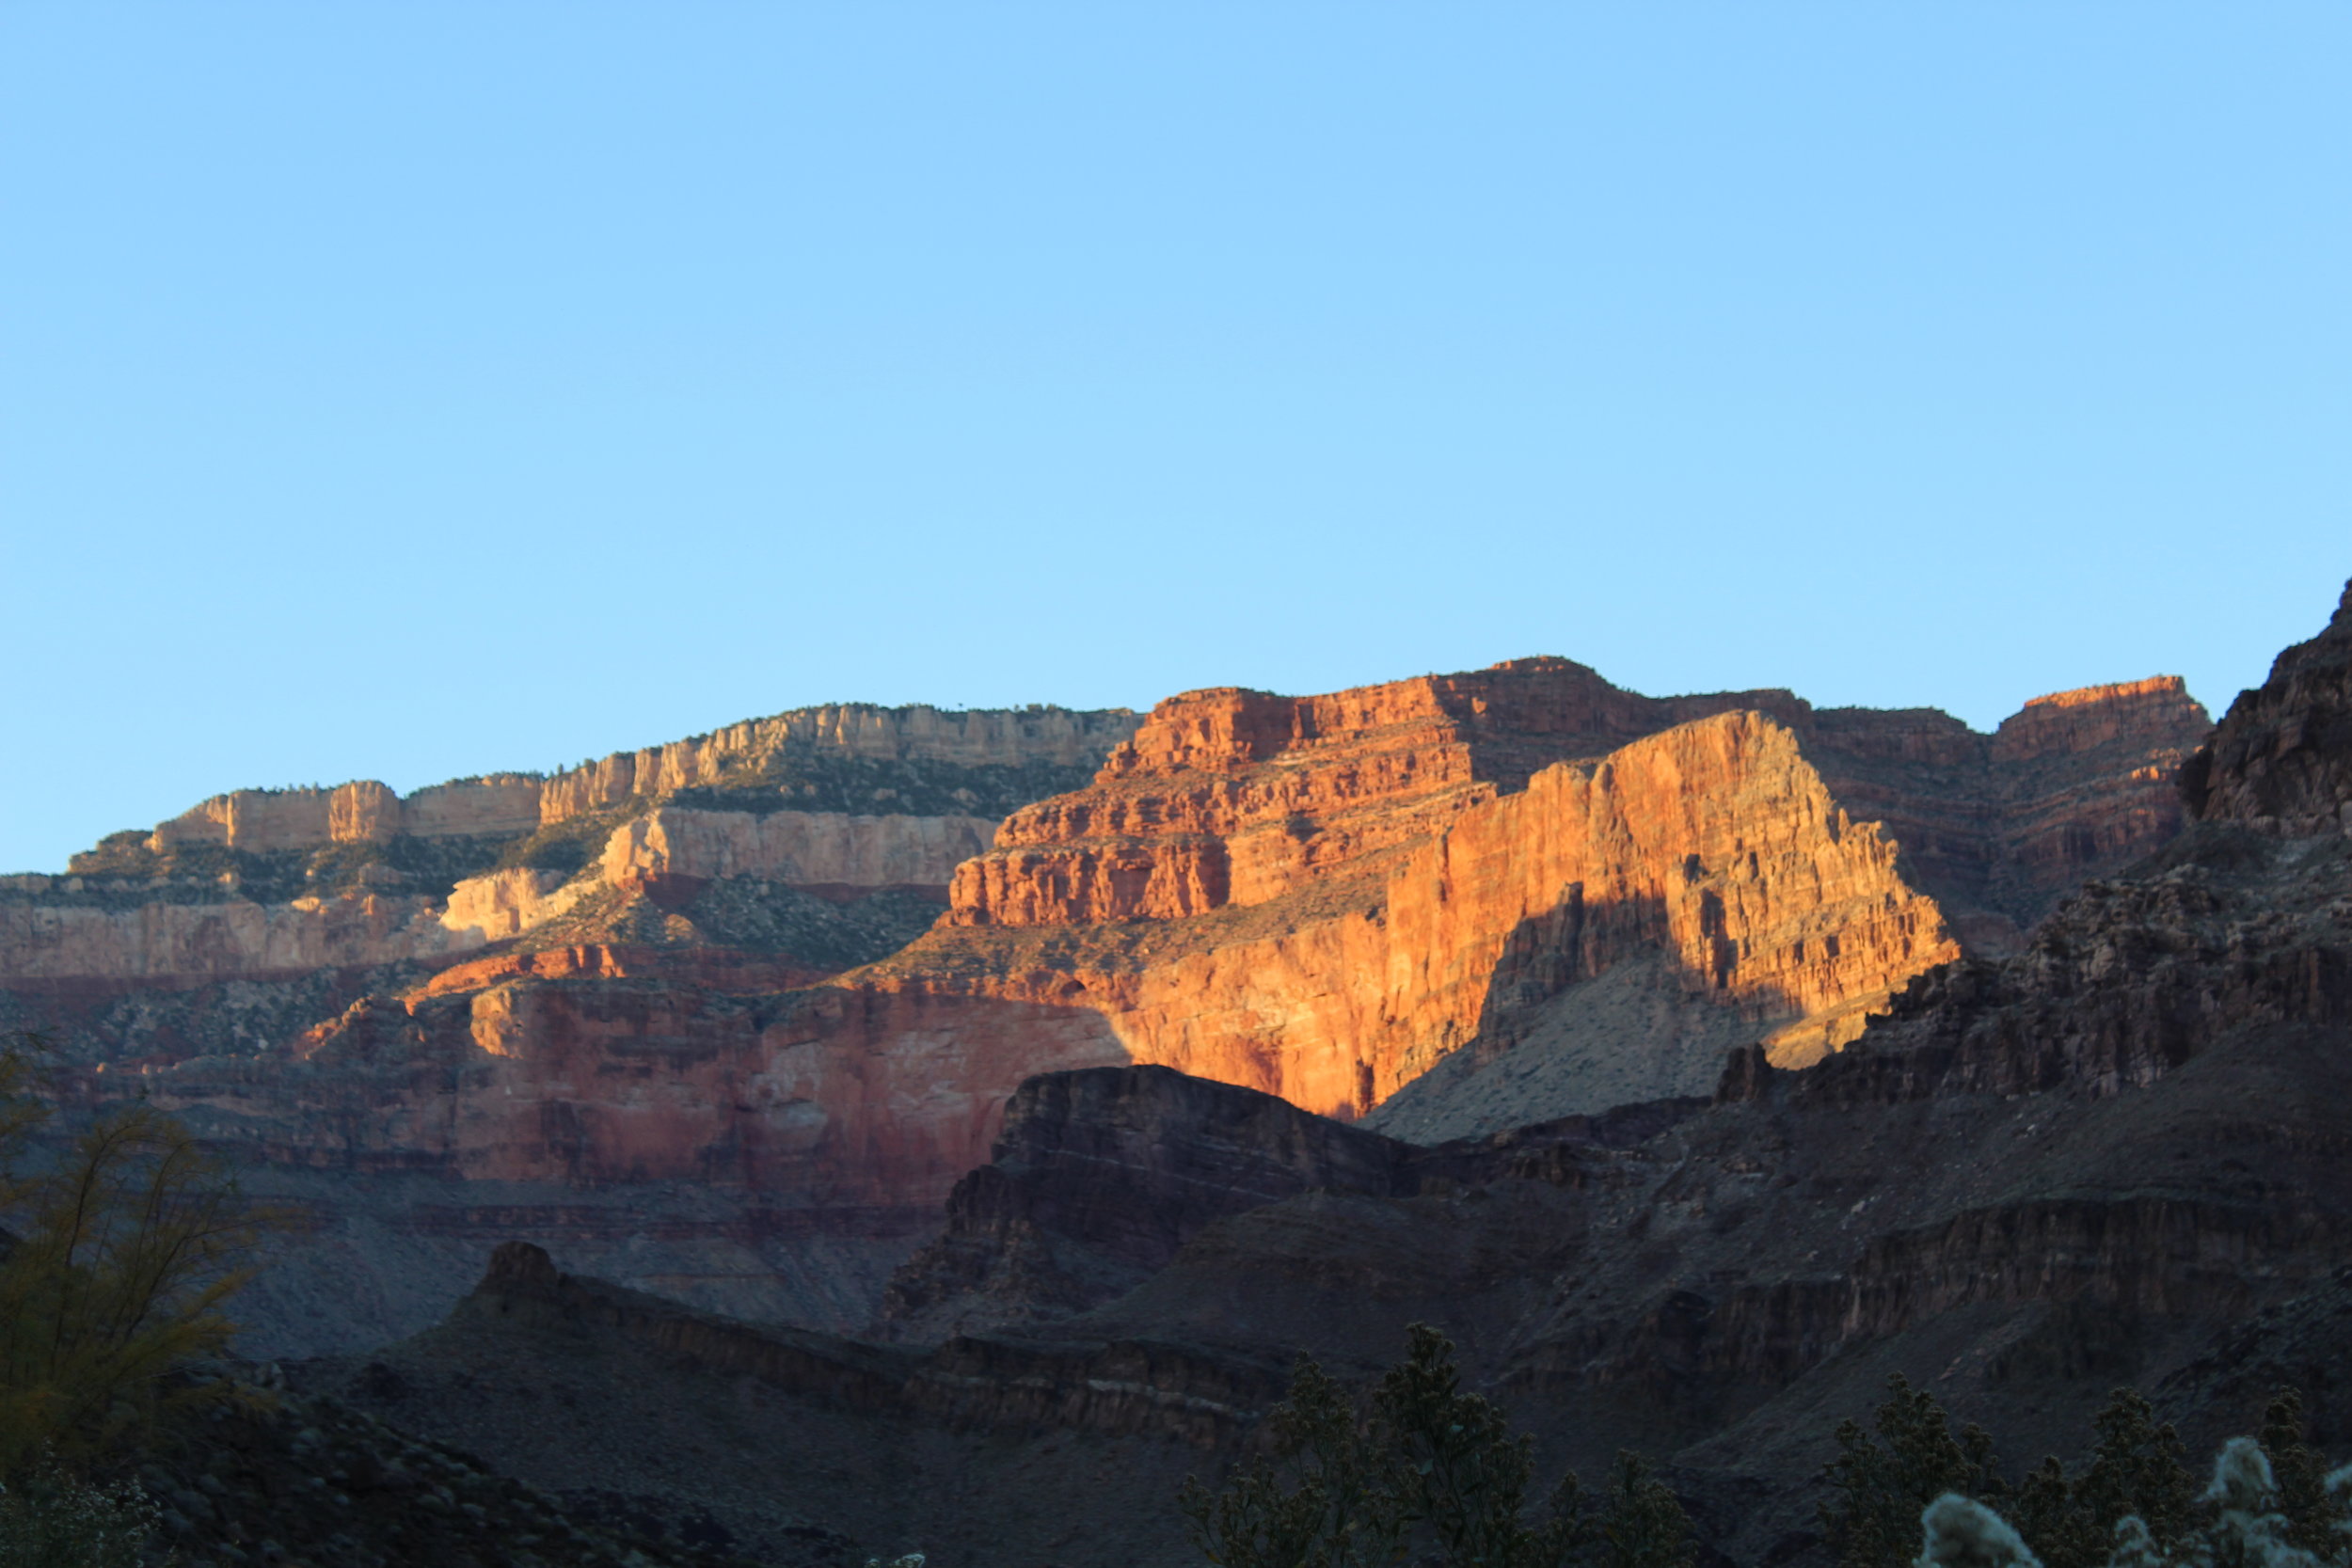 Sun sets on the upper walls of the north rim.